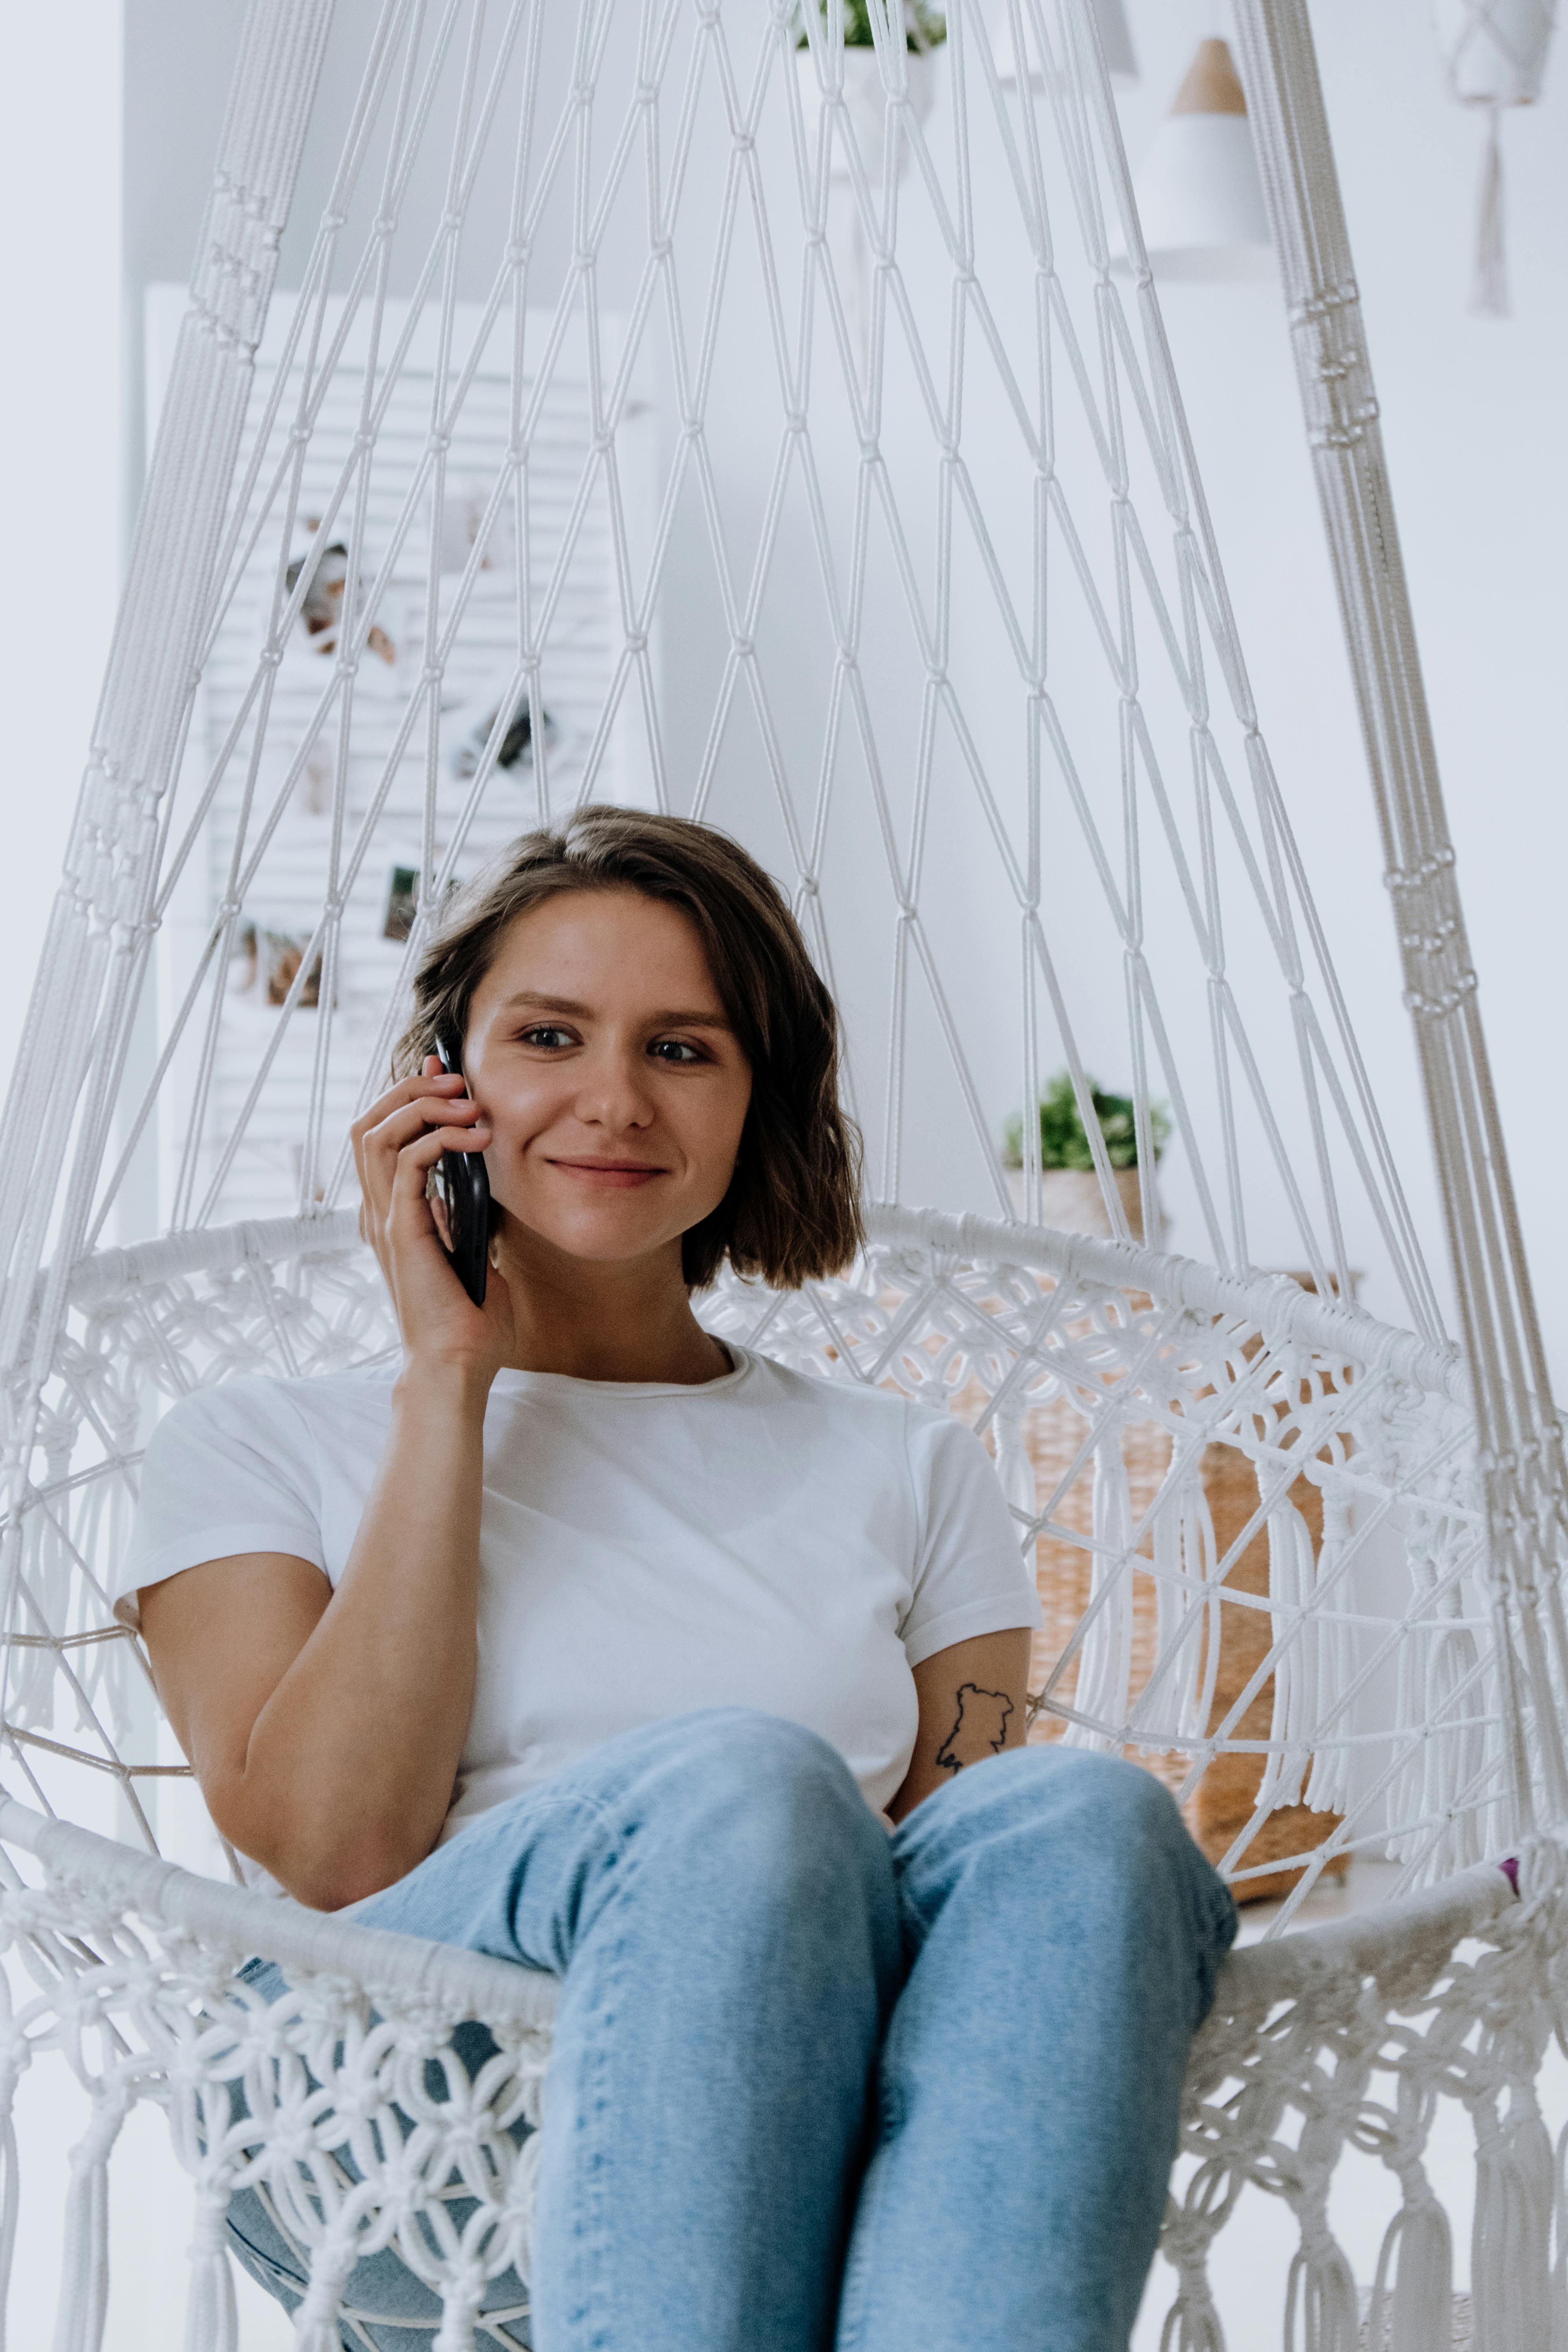 A neutral-looking woman talking to someone on the phone | Source: Pexels